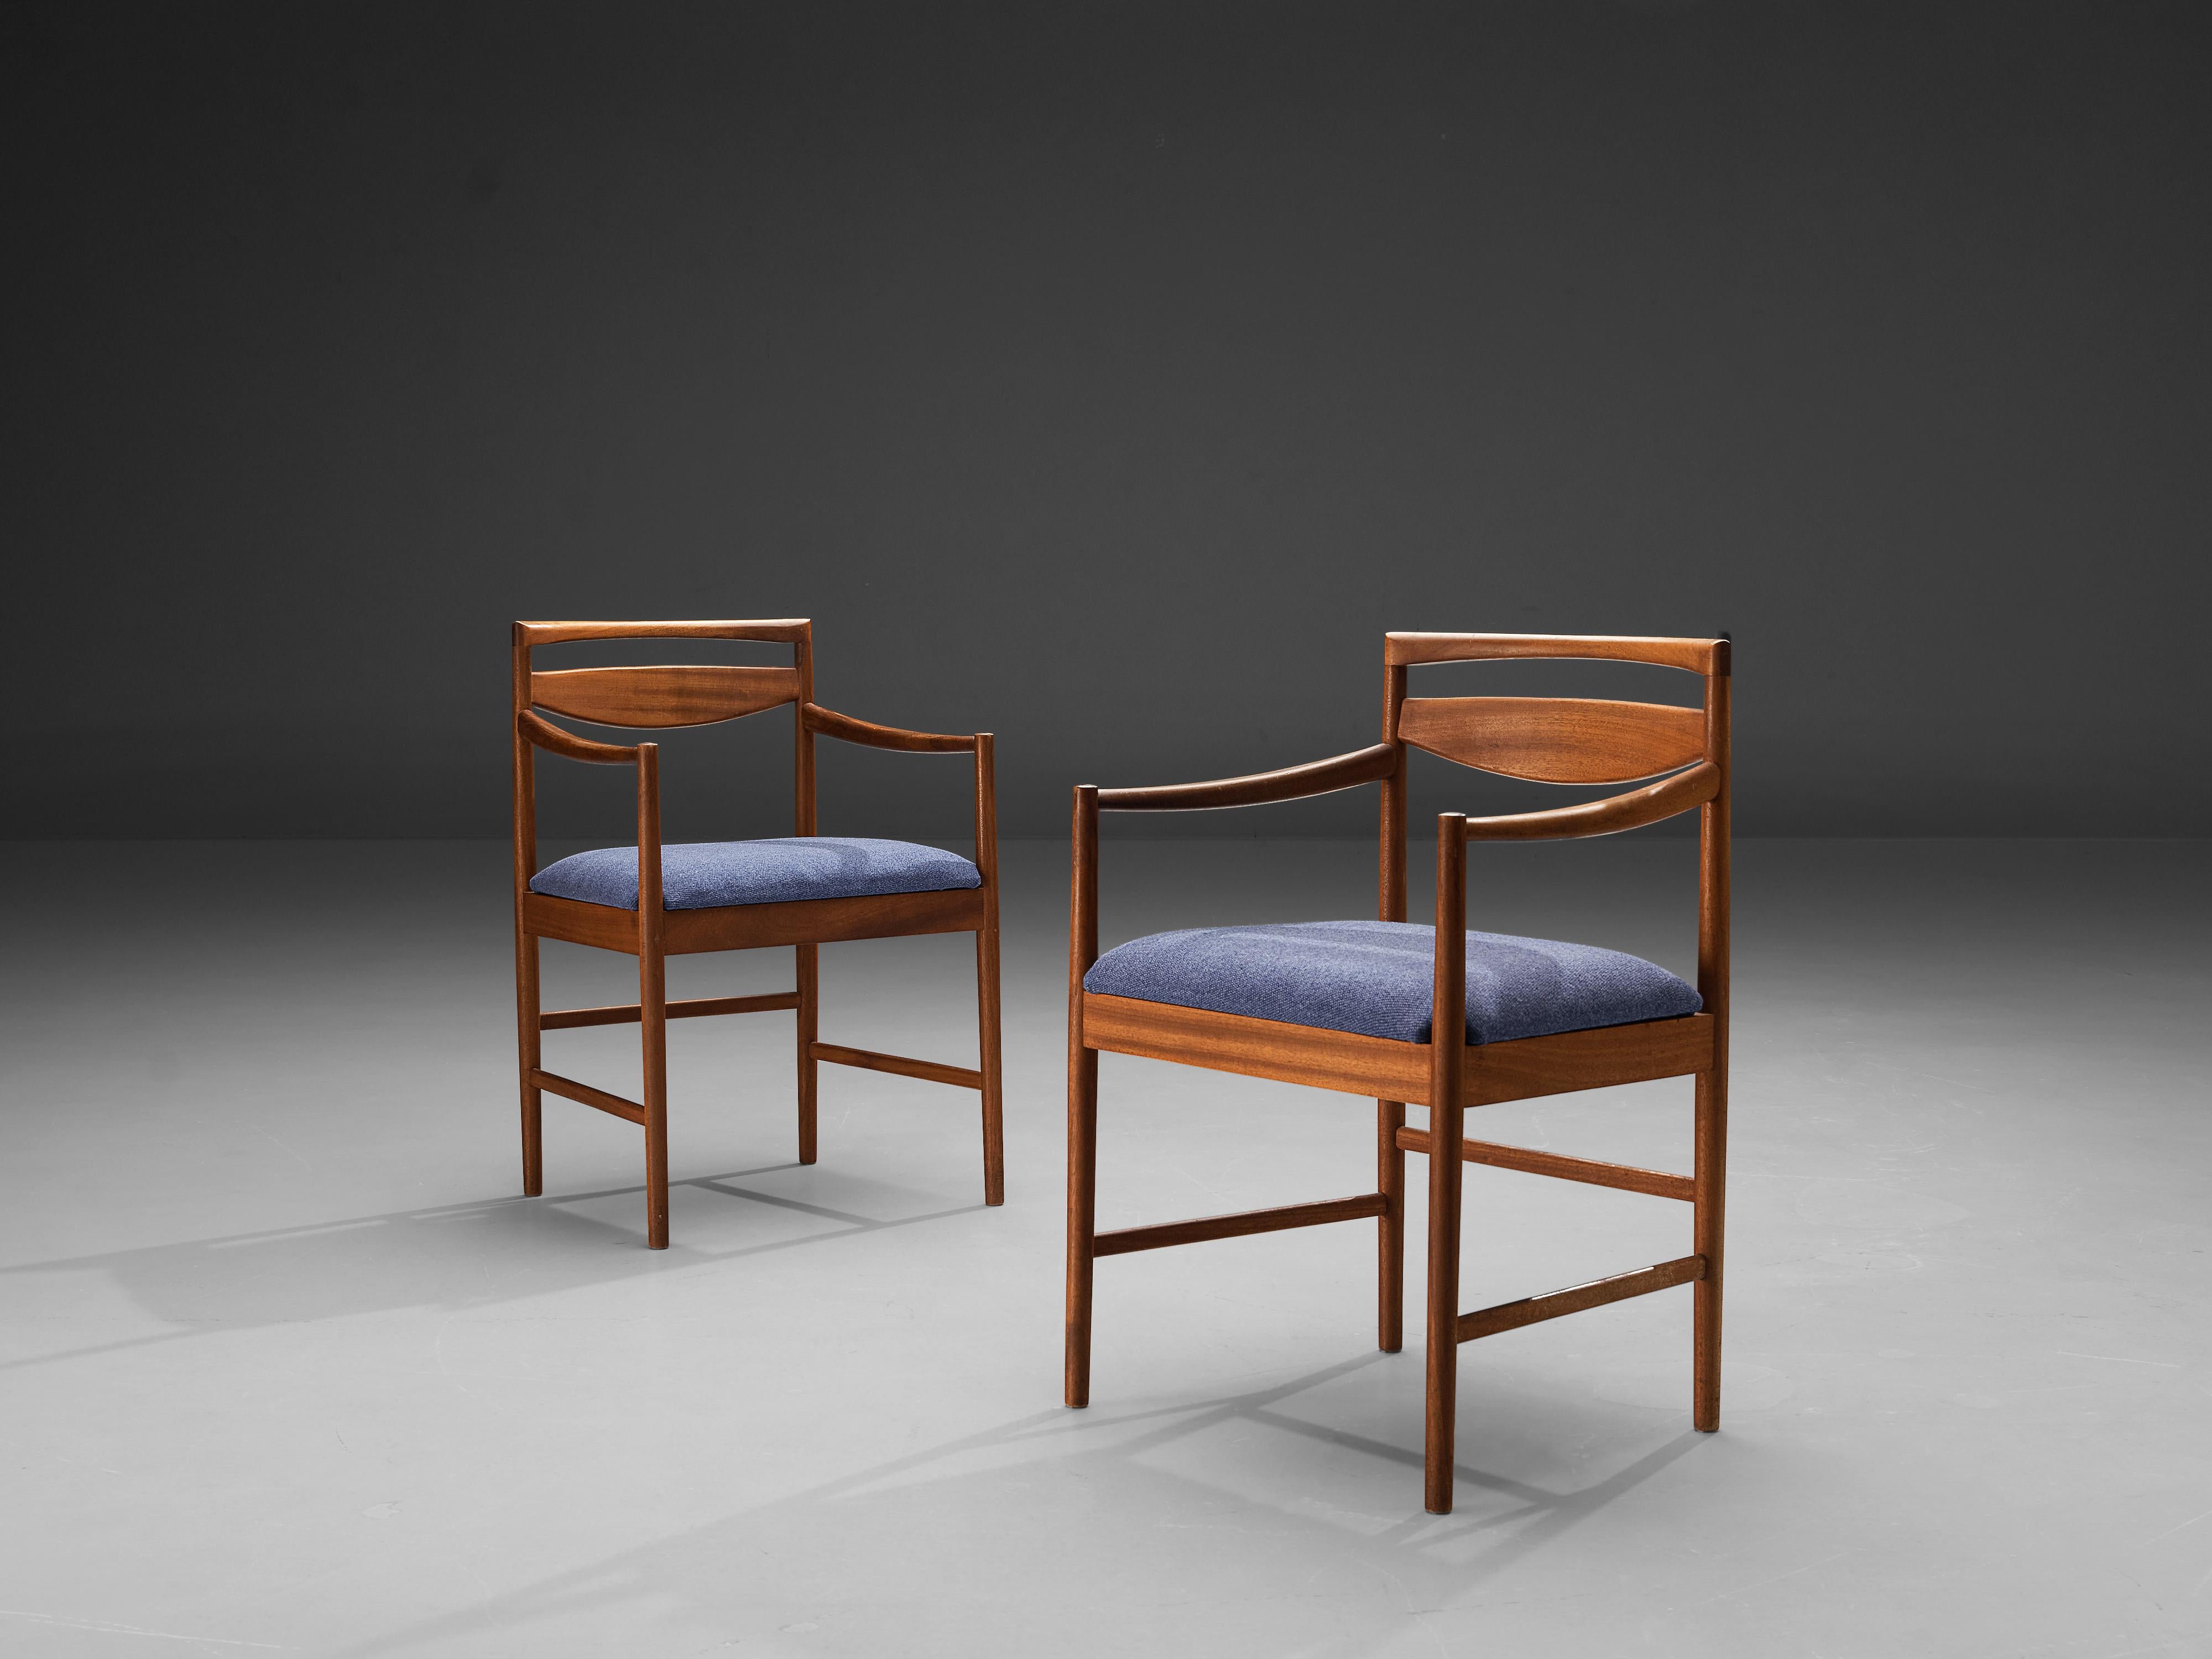 Pair of two armchairs, teak, blue fabric, Denmark, 1960s

Stunning pair of armchairs with striking backrests. The model is angular and modest as it is build up in mainly horizontal and vertical lines. Only the backrest is curved and frames a